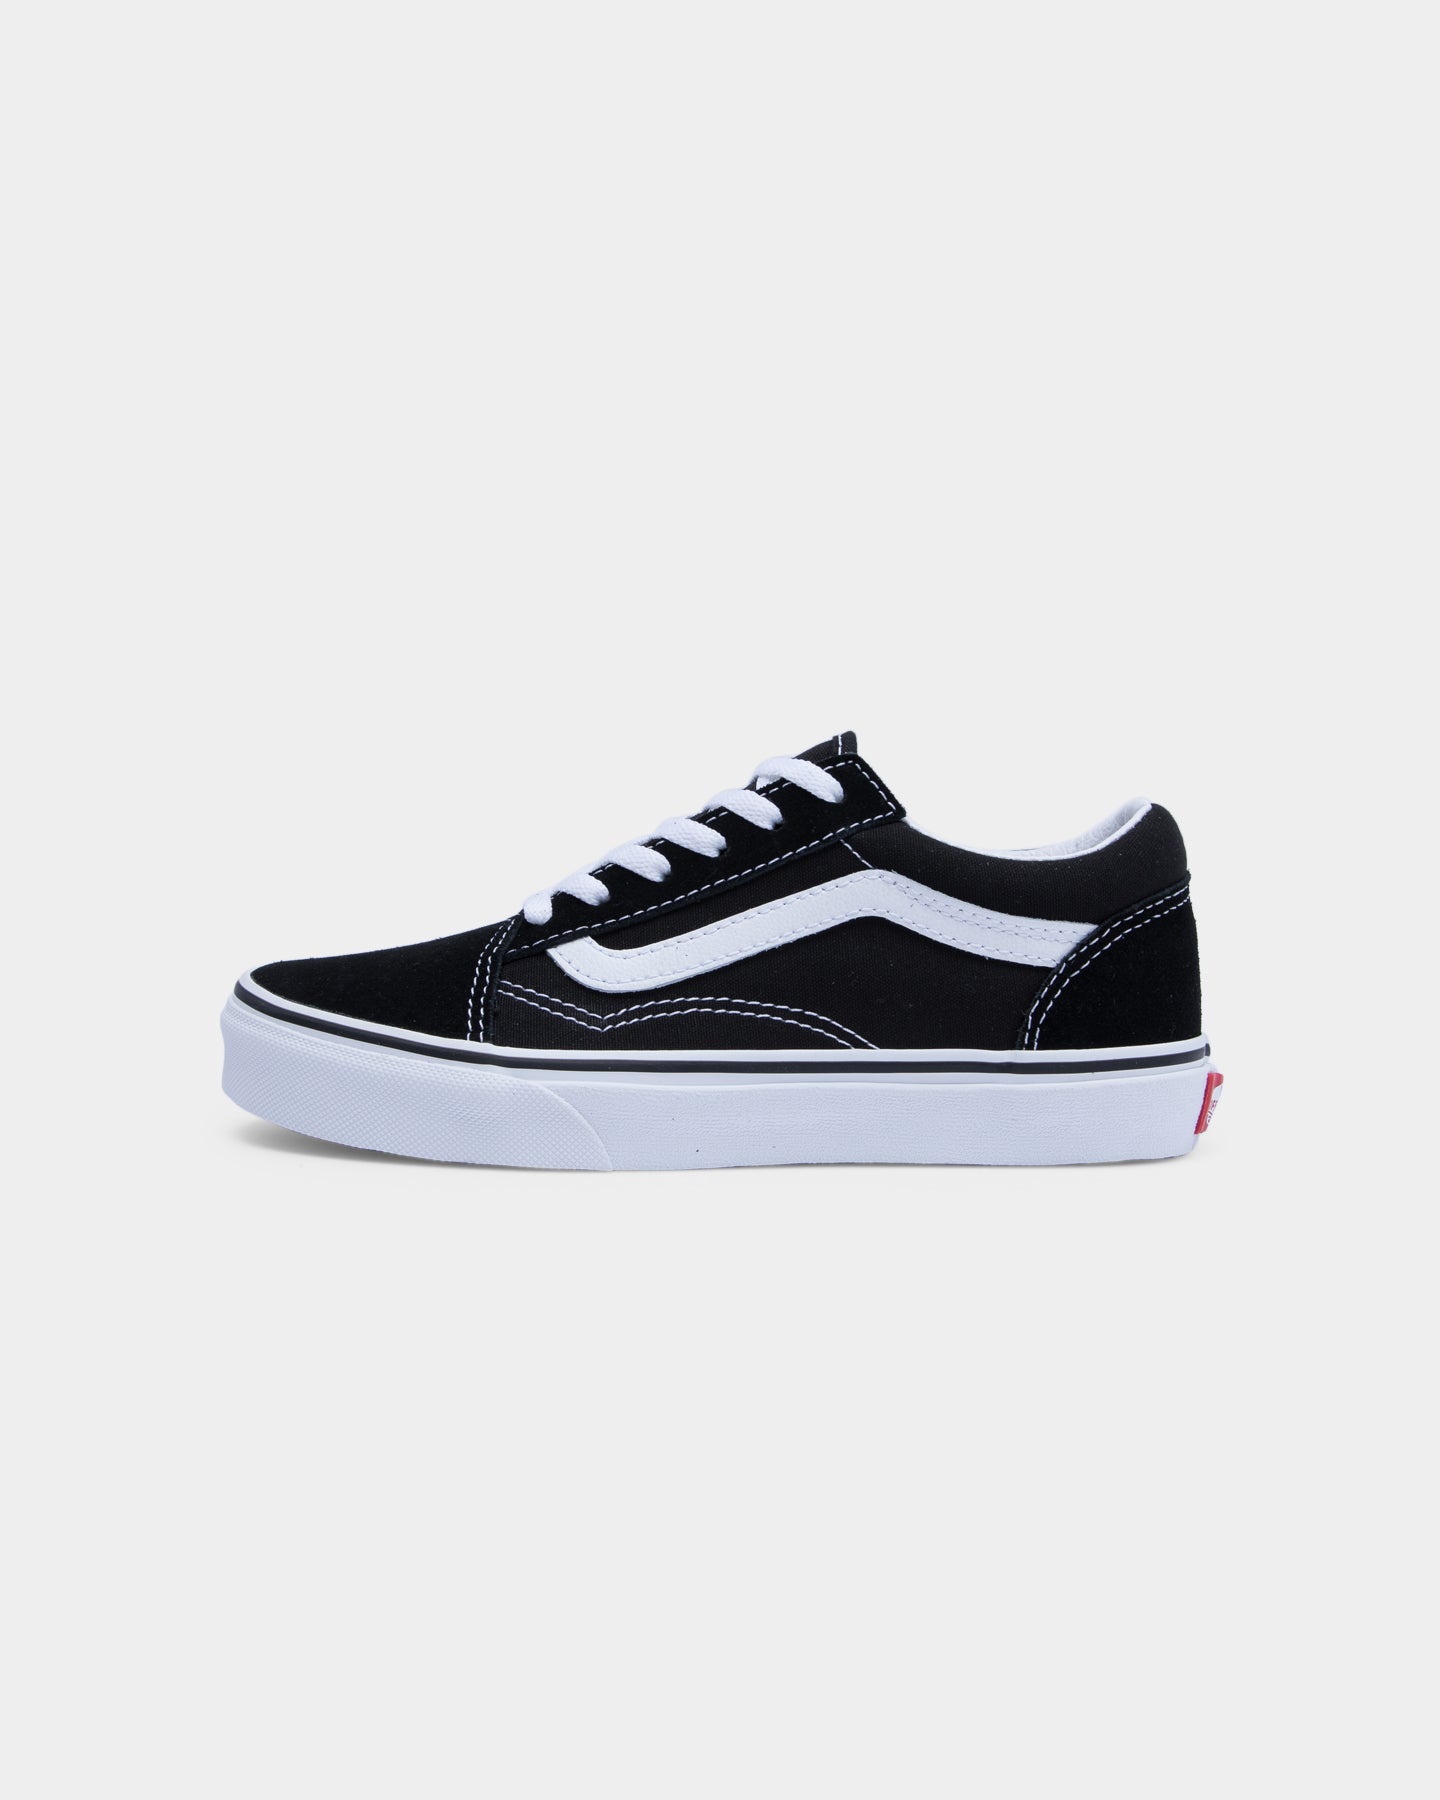 where to buy vans shoes in auckland